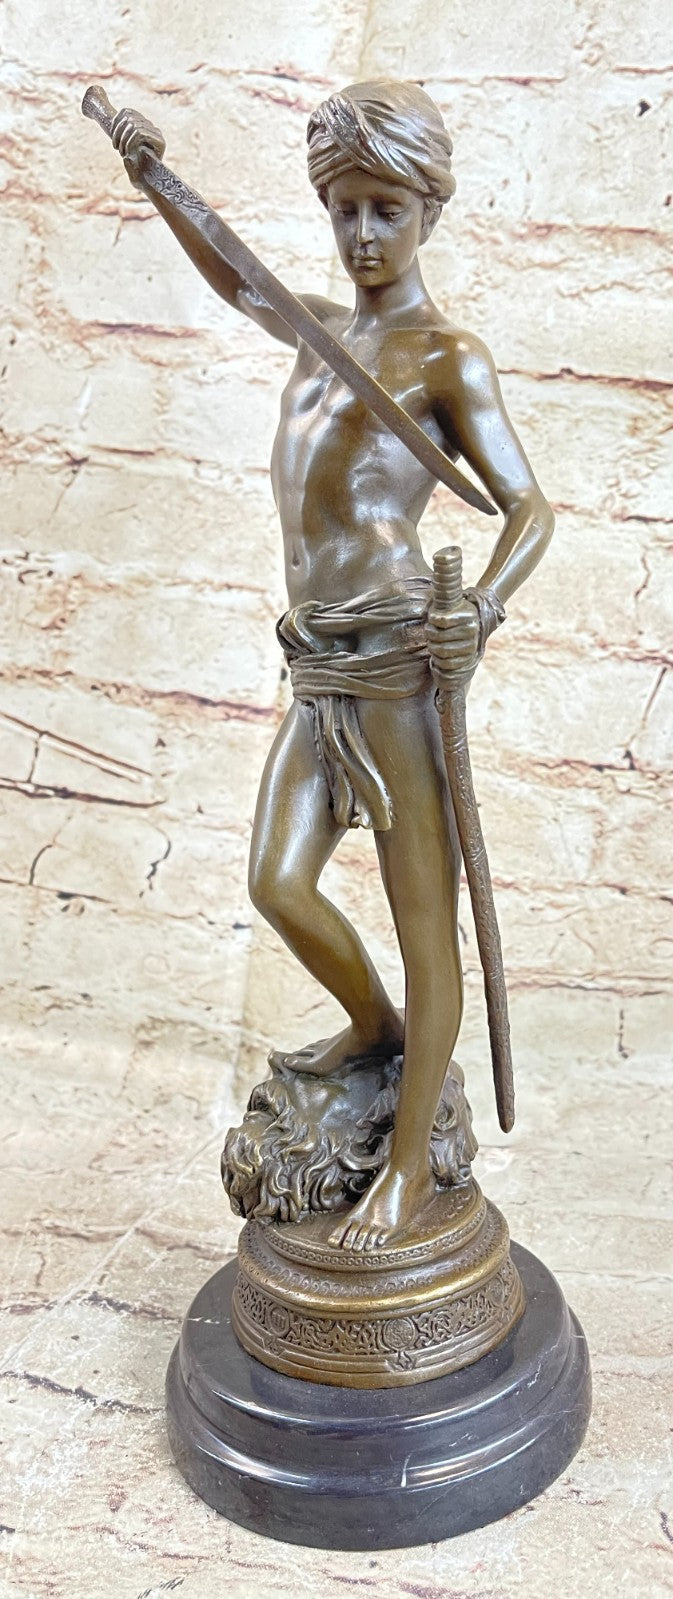 Turn of century bronze statue representing David and Goliath. Signed "A. Mercie